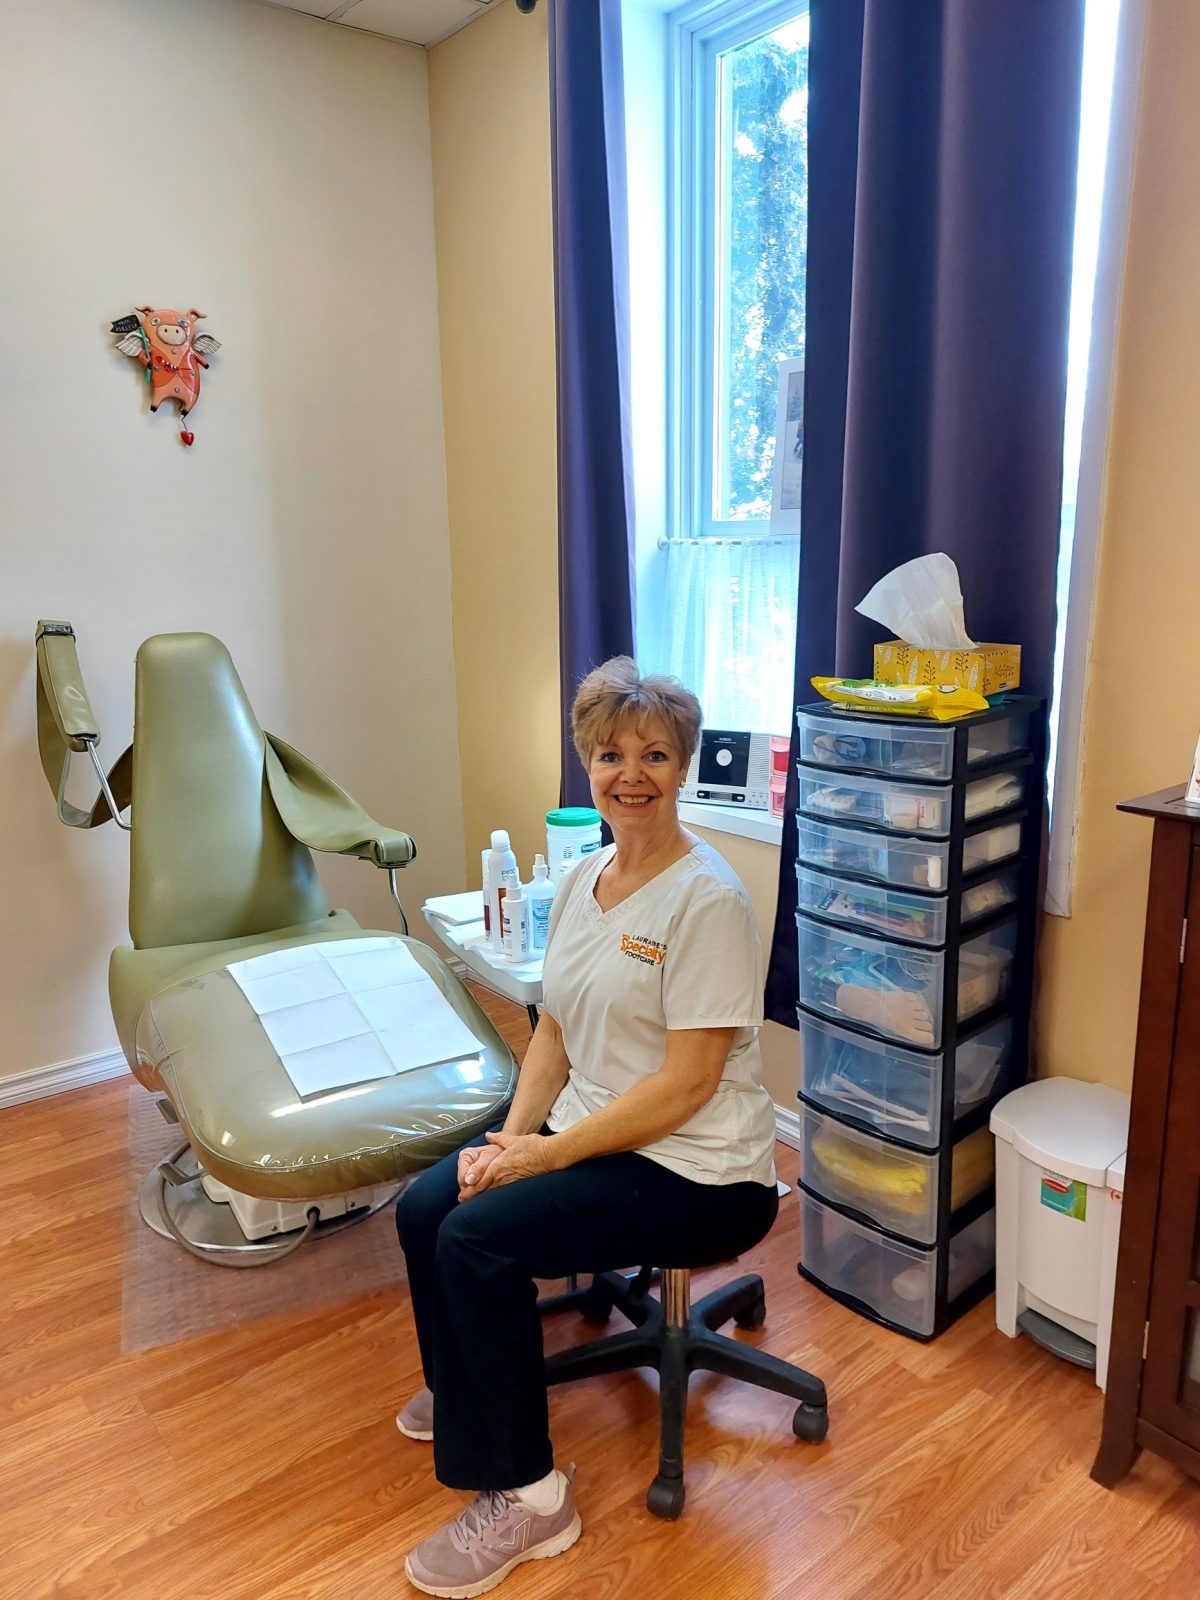 Small Biz Feature: Lauraine’s Specialty Foot Care